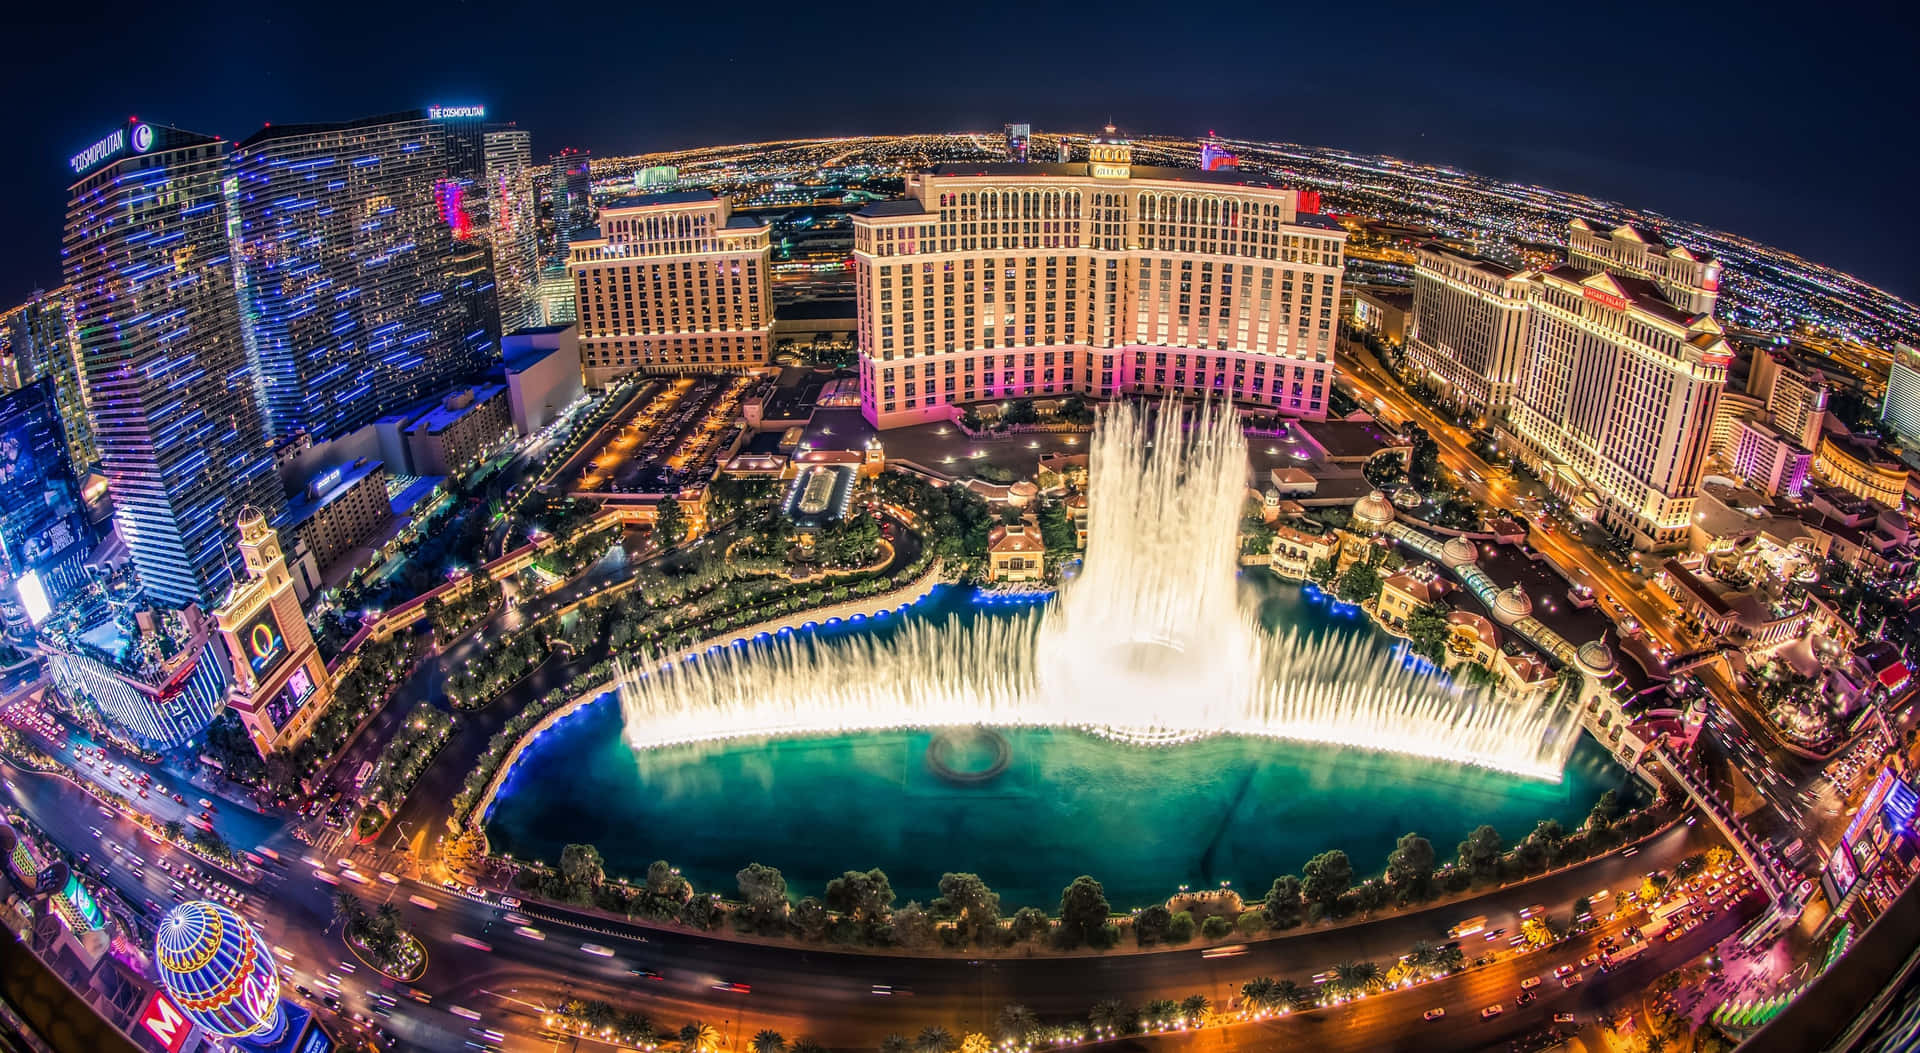 Enjoy the beauty and excitement of Las Vegas